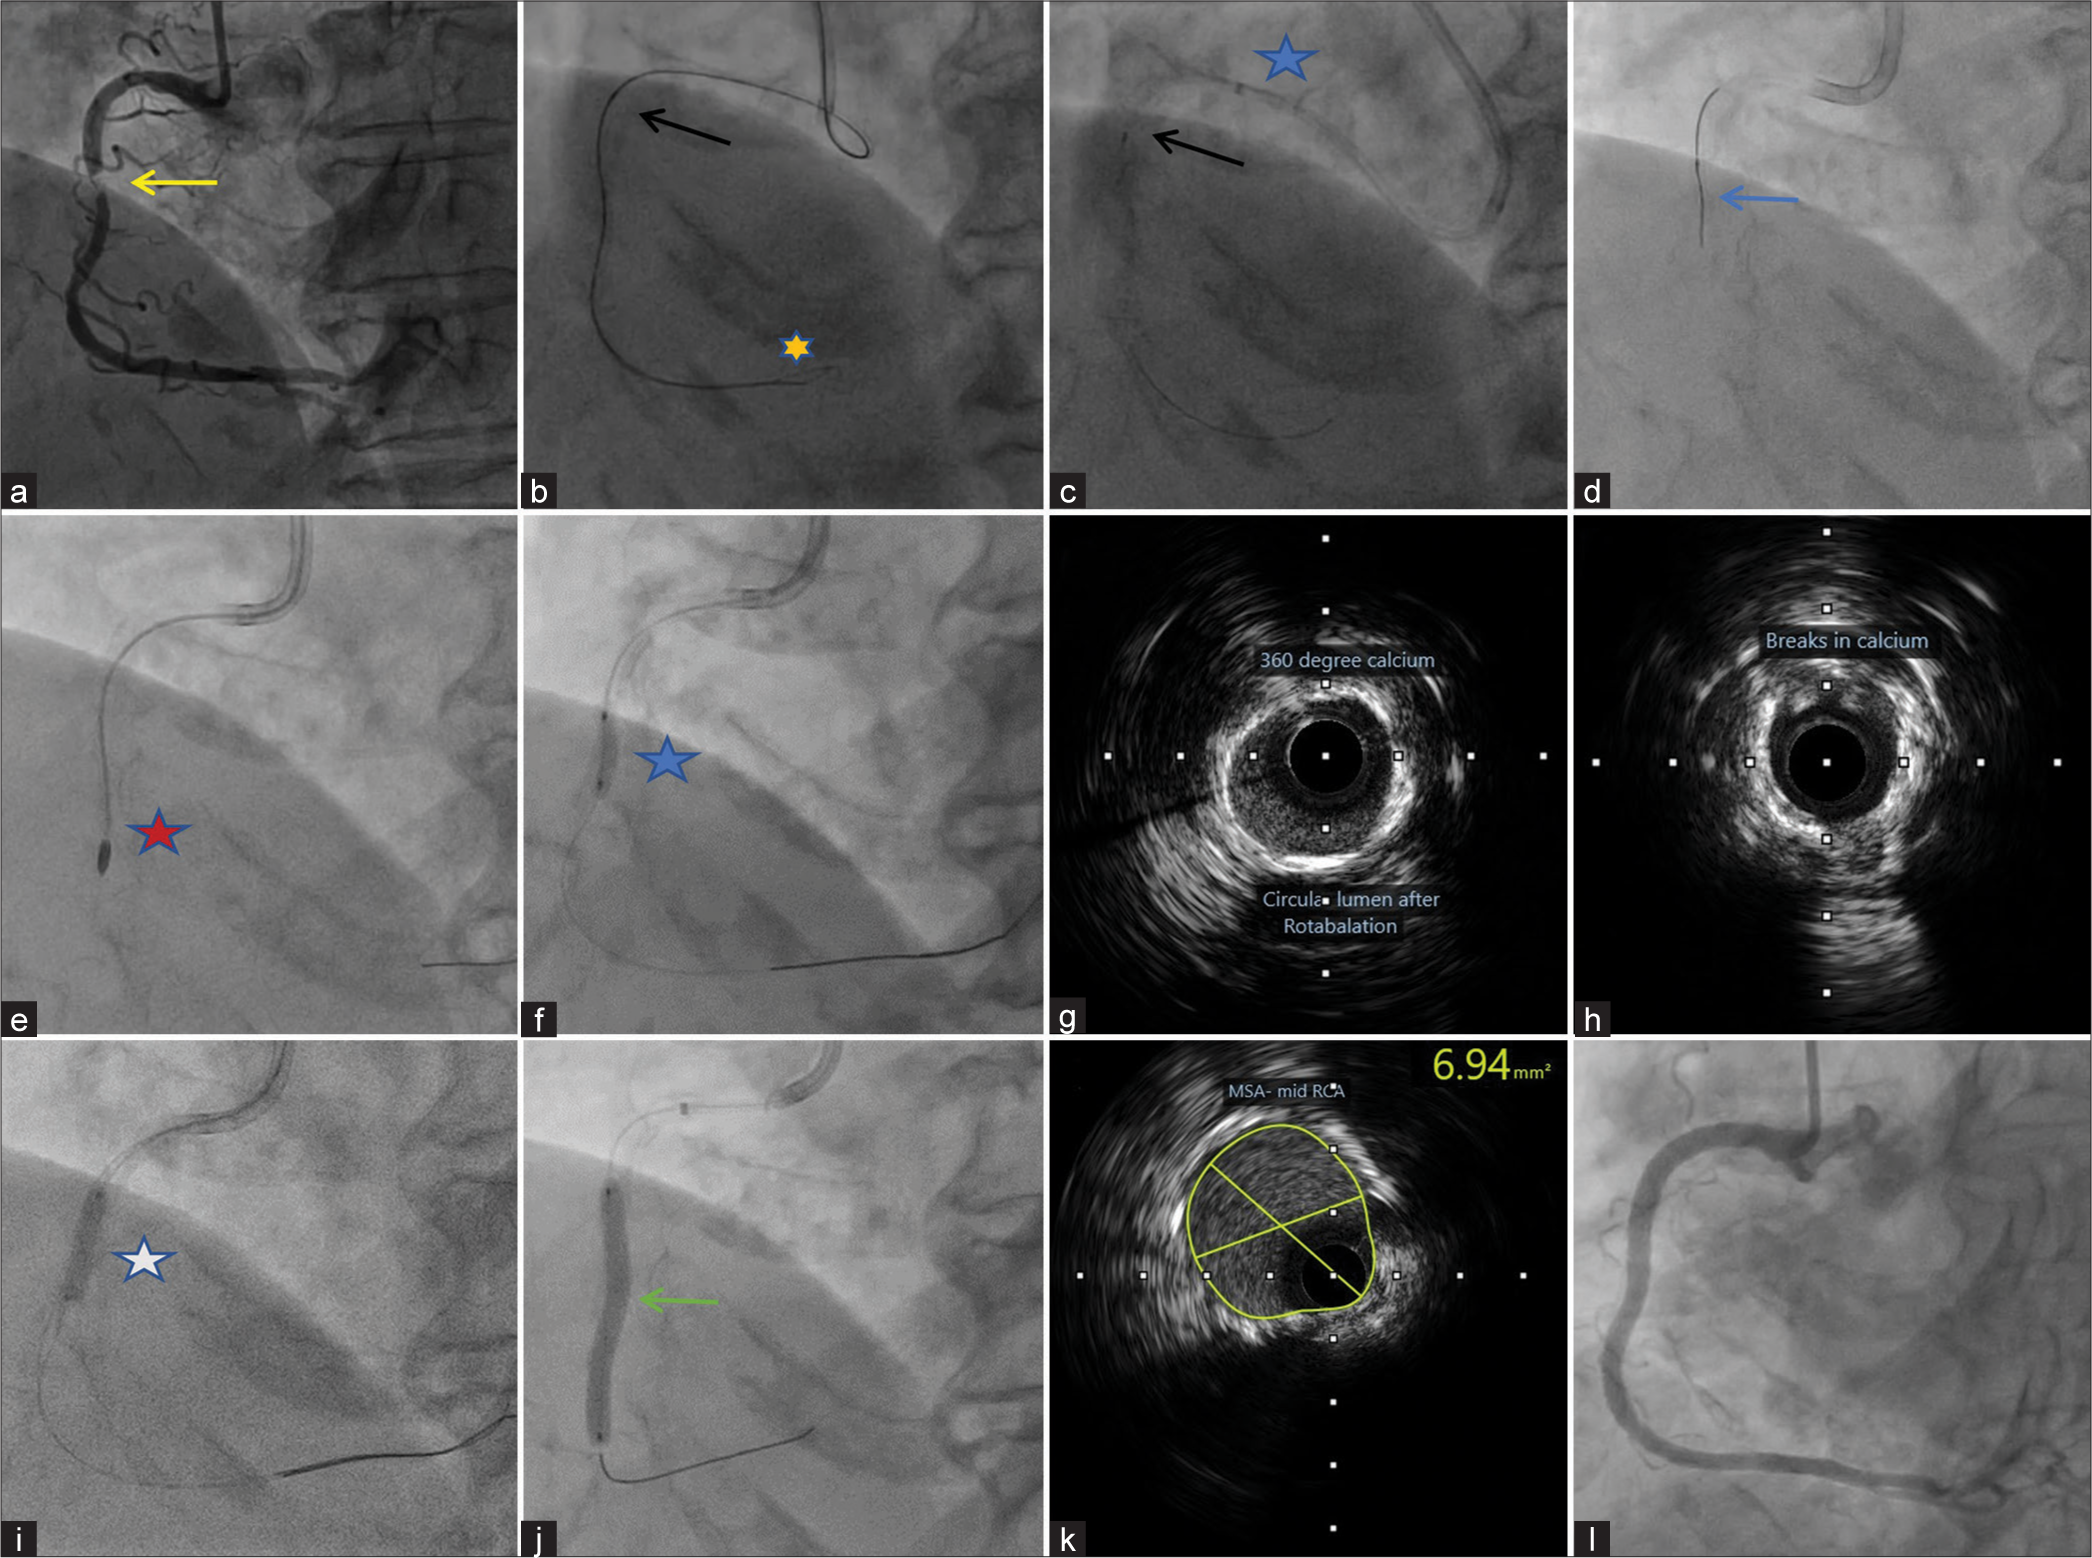 (a) Coronary angiography left anterior oblique projection (LAO) 30, showing tight lesion in proximal right coronary artery (RCA) (yellow arrow), (b) Fluoroscopic image showing difficulty in crossing the lesion using low profile balloon (black arrow), even with a buddy wire (yellow star), (c) Fluoroscopic image showing difficulty in crossing the lesion using low profile balloon (black arrow) even with guideliner support (blue star), (d) lesion crossed directly using rota floppy wire (blue arrow), (e) rotablation with 1.5 mm red star- rota burr, (f) pre-dilation with 2.75 × 9 mm blue star- dog boning effect while balloon inflation, (g and h) intravascular ultrasound (IVUS) image showing nearly 360° calcium and some breaks after rotablation (i) 3 × 12 mm white star- lithotripsy balloon, (j) stenting with 3 × 28 mm and 3.5 × 23 mm drug eluting stent, with uniform stent expansion (green arrow), (k) post-stent IVUS image yellow circled area- is minimal Stent area (MSA) of 6.94 mm 2, and (l) final angiogram with good end result.